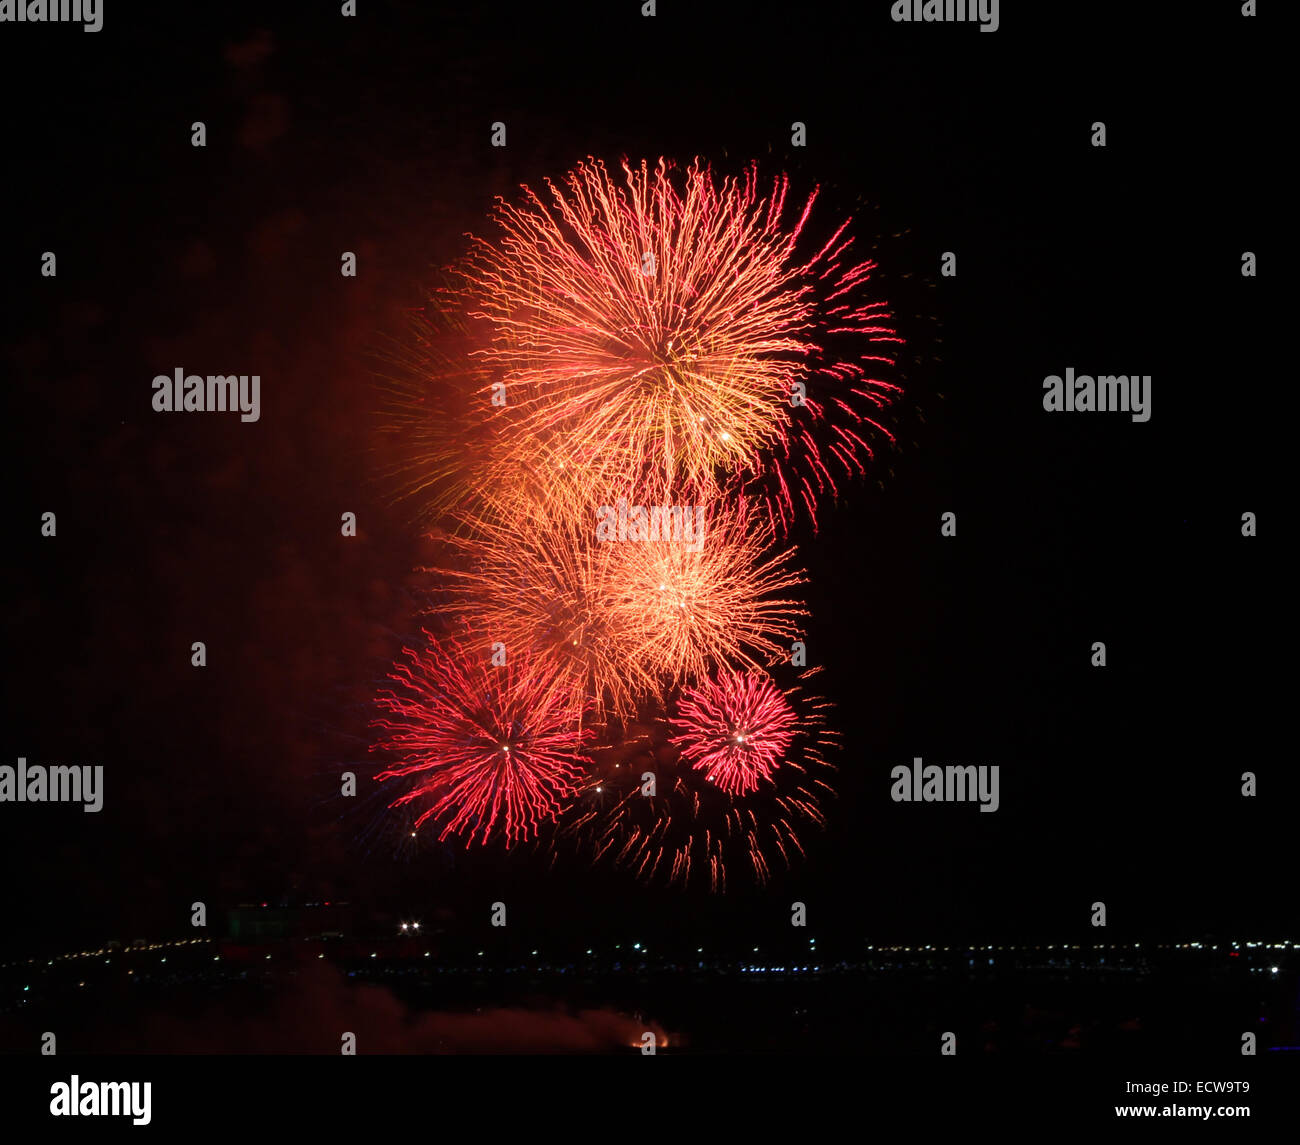 Close-up of a red fireworks display symbolizing New Year, celebration and pyrotechnics Stock Photo